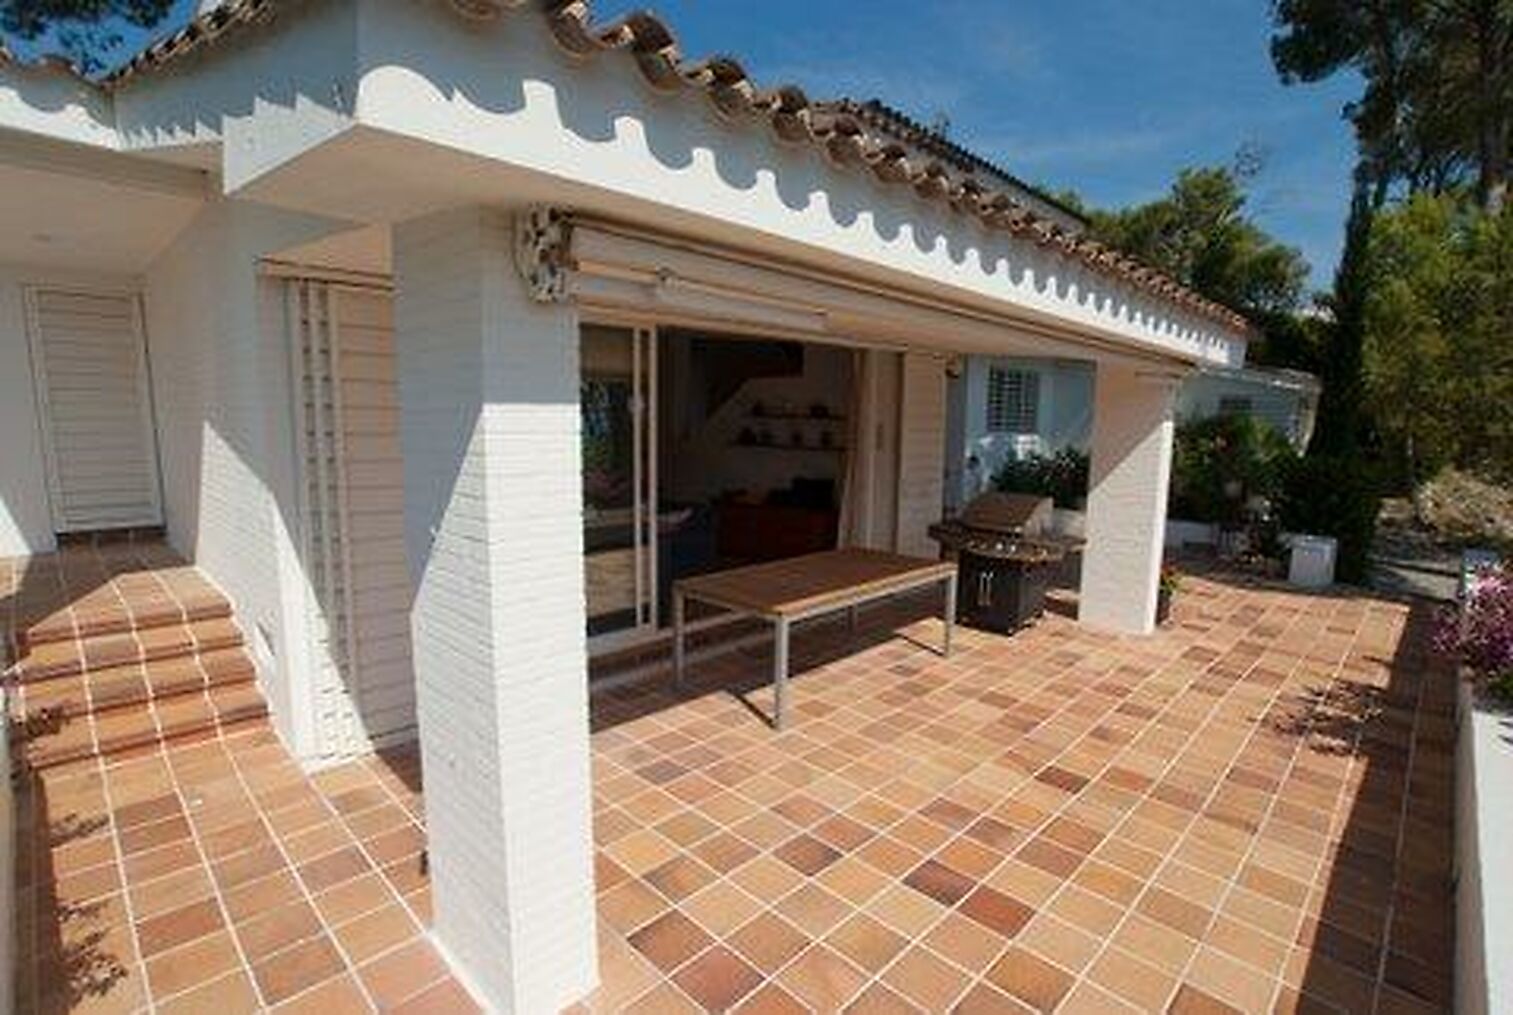 Luxury Villa in an excellent front line location with lovely sea views.